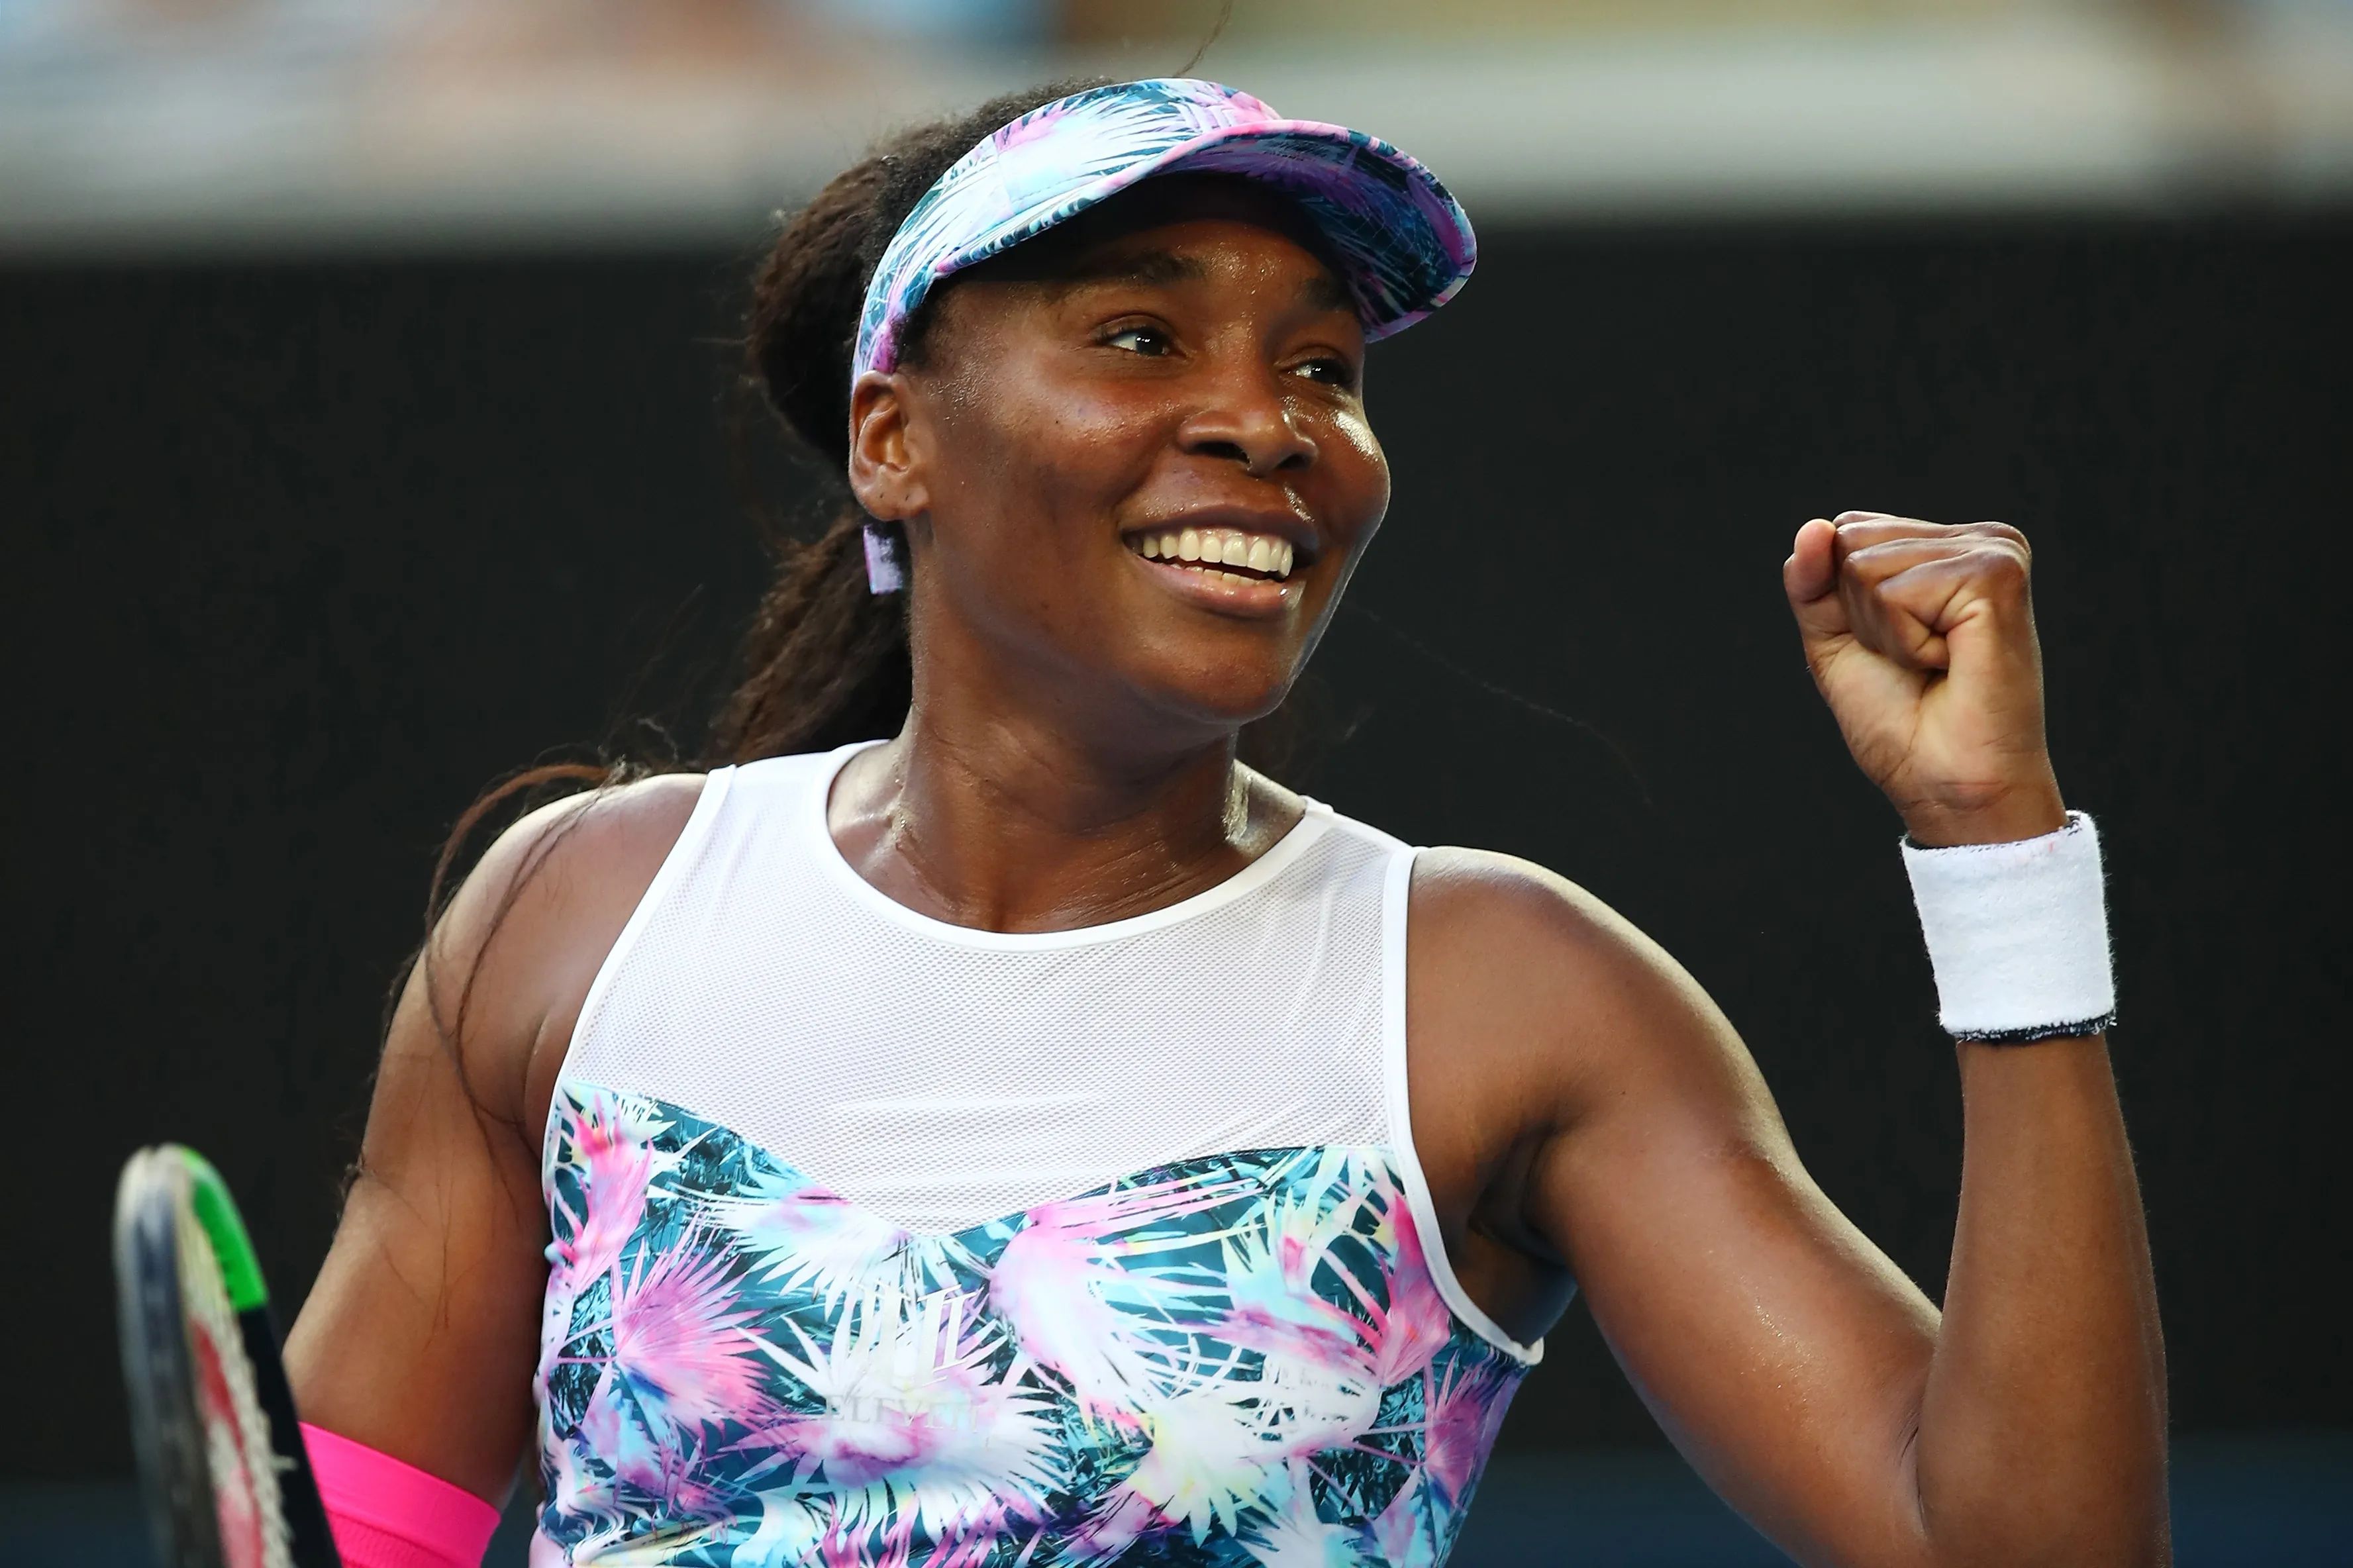 Venus Williams celebrates after winning match point in her first round match against Mihaela Buzarnescu during day two of the 2019 Australian Open at Melbourne Park.